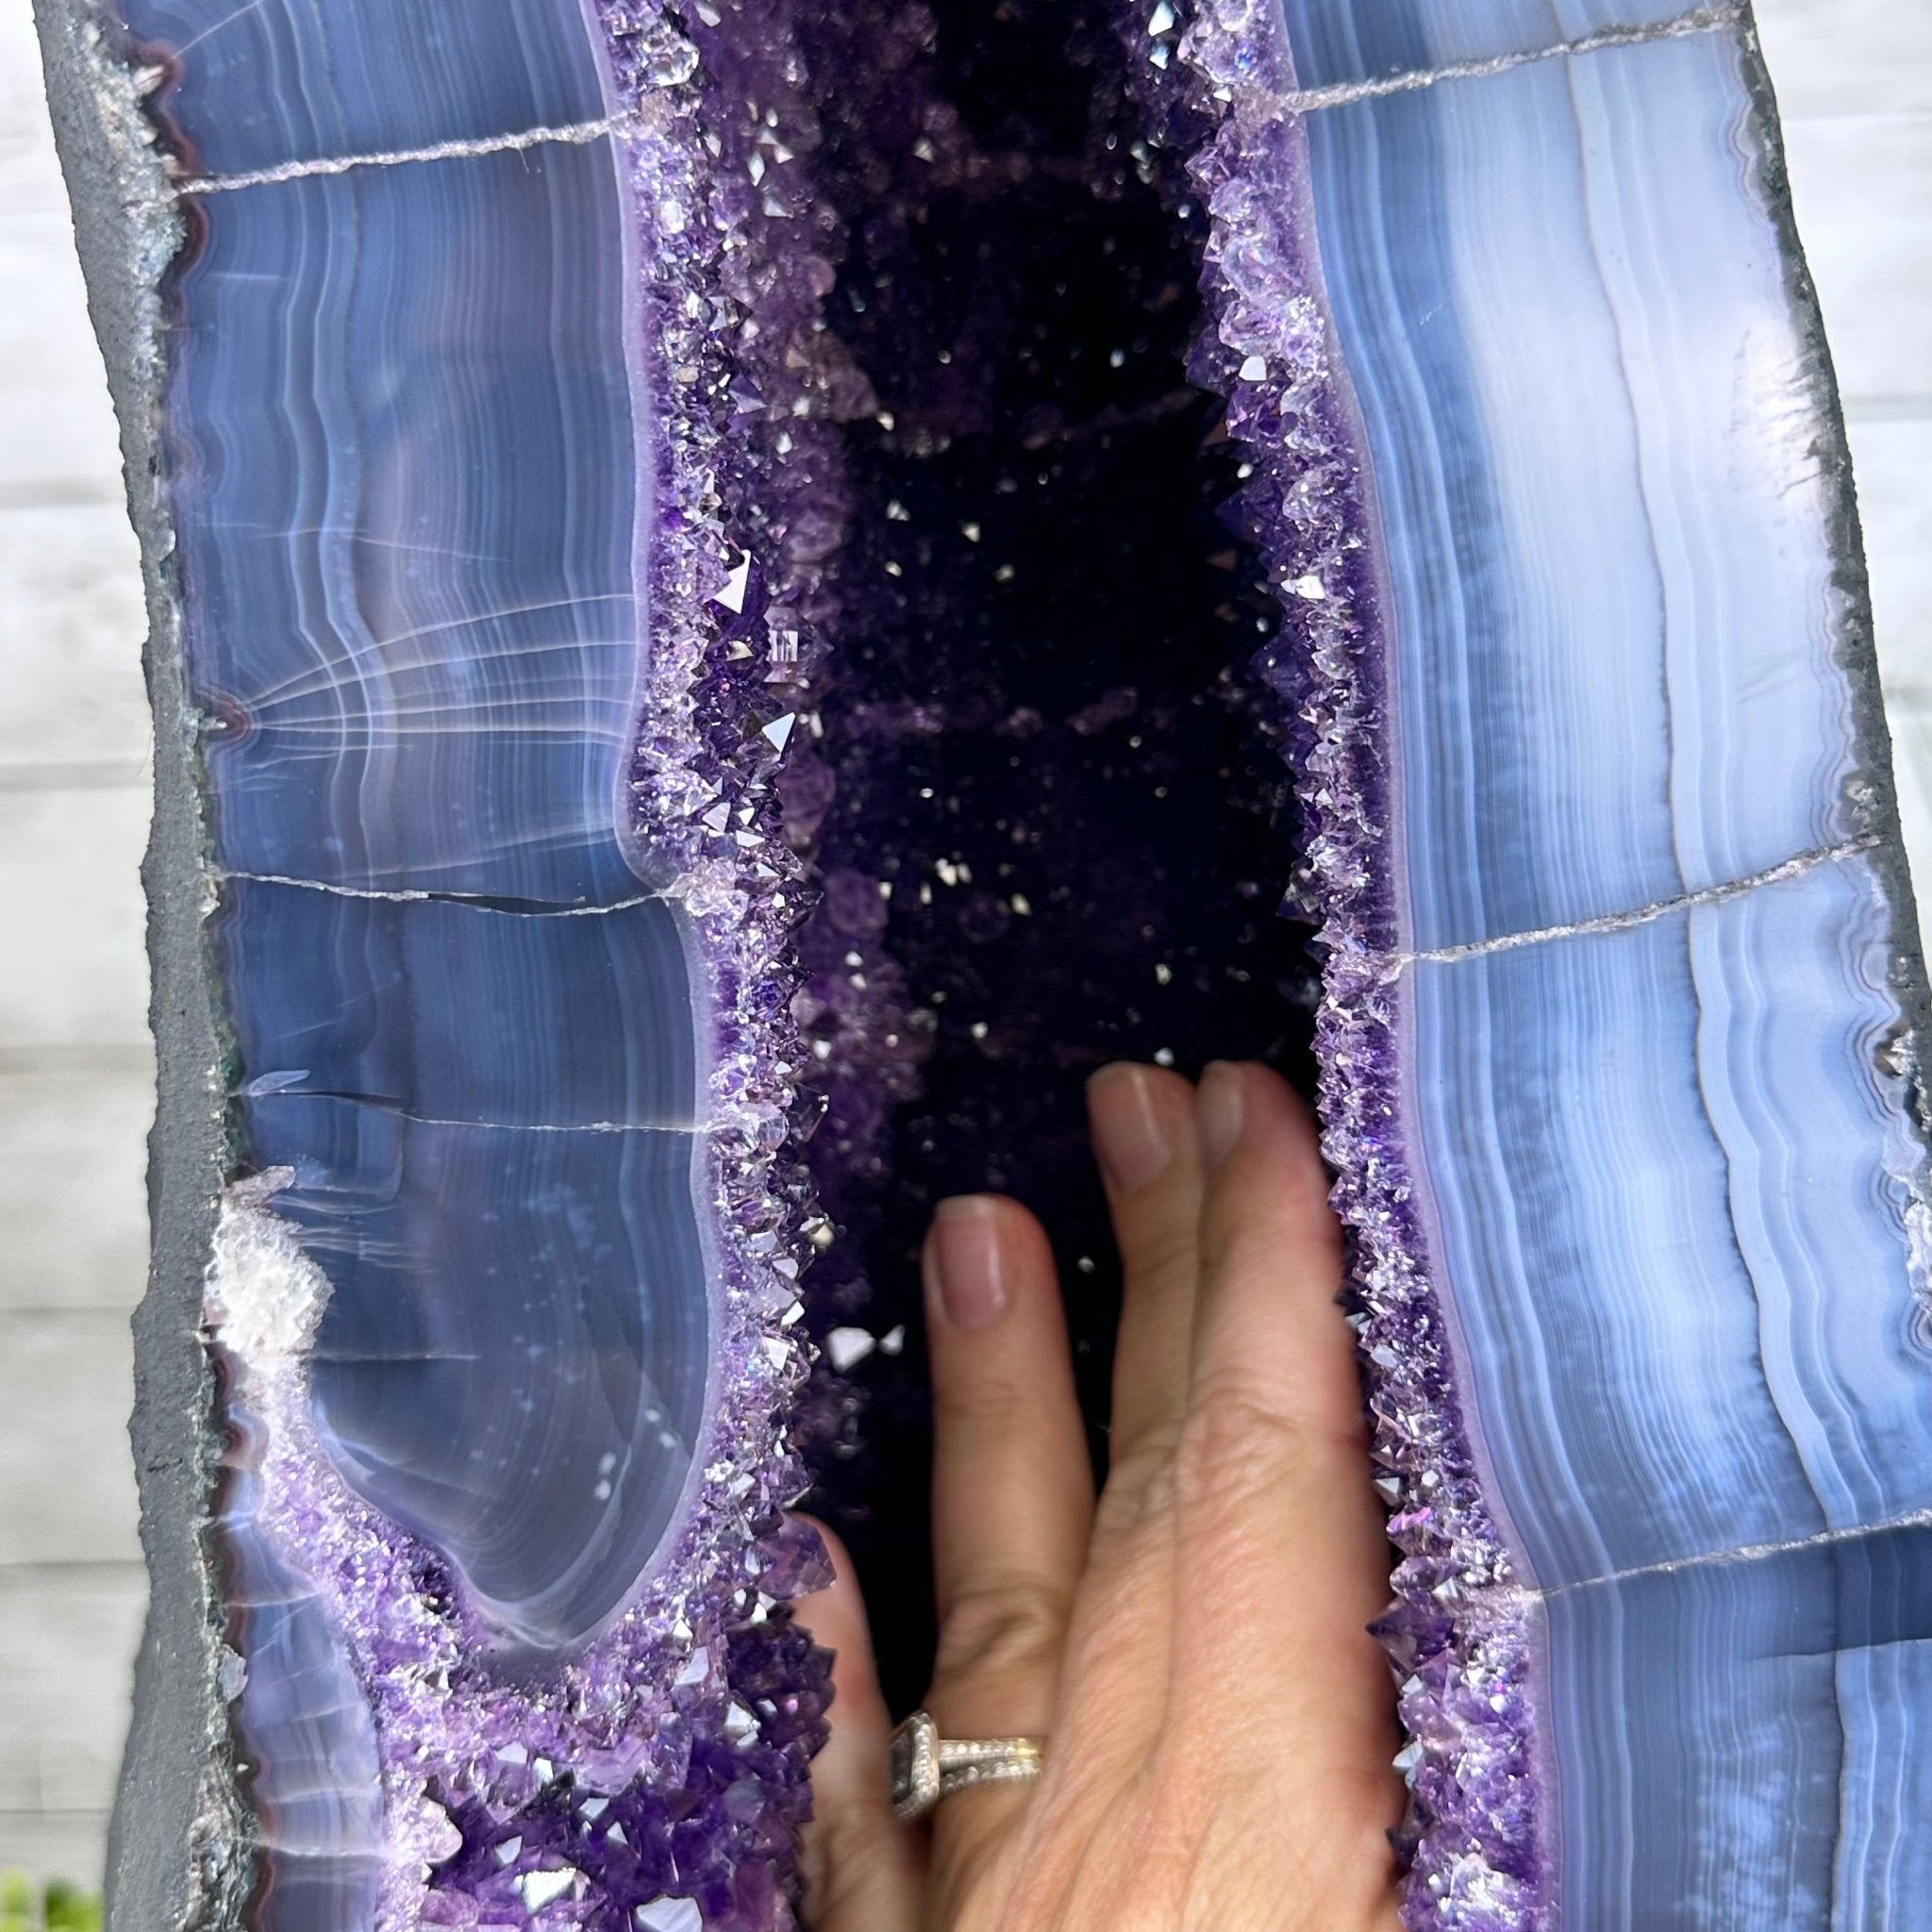 Extra Quality Brazilian Amethyst Cathedral, 79.6 lbs & 23" Tall, Model #5601-0826 by Brazil Gems - Brazil GemsBrazil GemsExtra Quality Brazilian Amethyst Cathedral, 79.6 lbs & 23" Tall, Model #5601-0826 by Brazil GemsCathedrals5601-0826